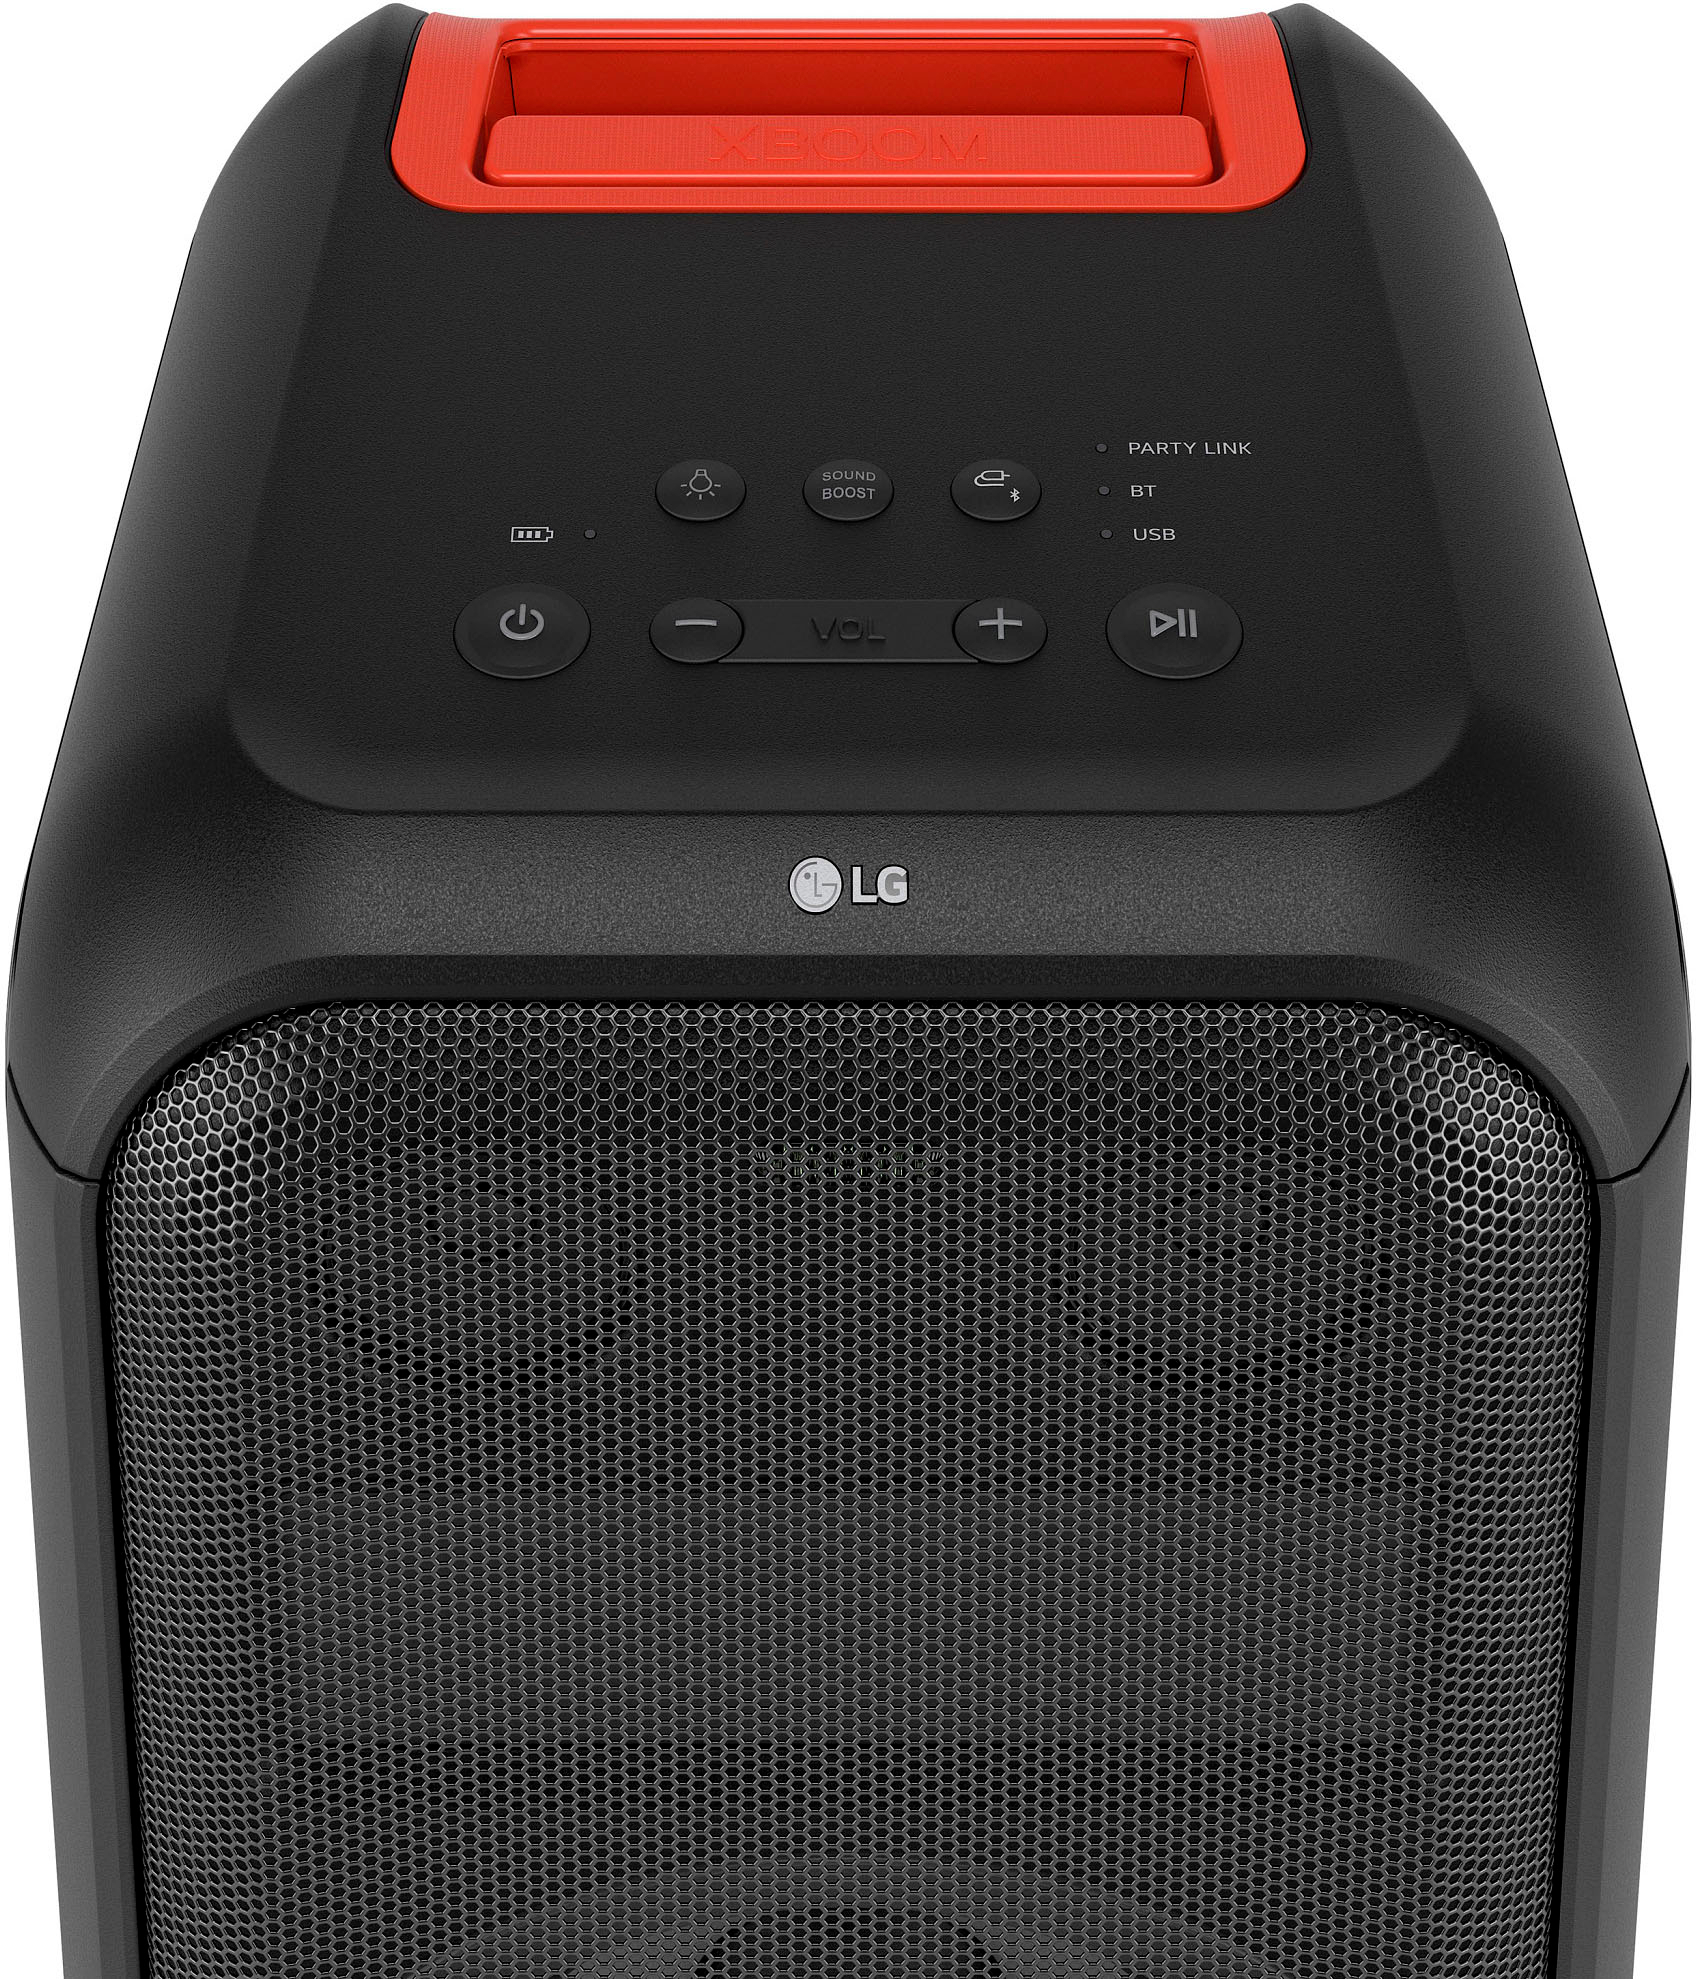 XL7 LED - LG Best XBOOM Tower Black Buy Speaker Portable with Party Pixel XL7S